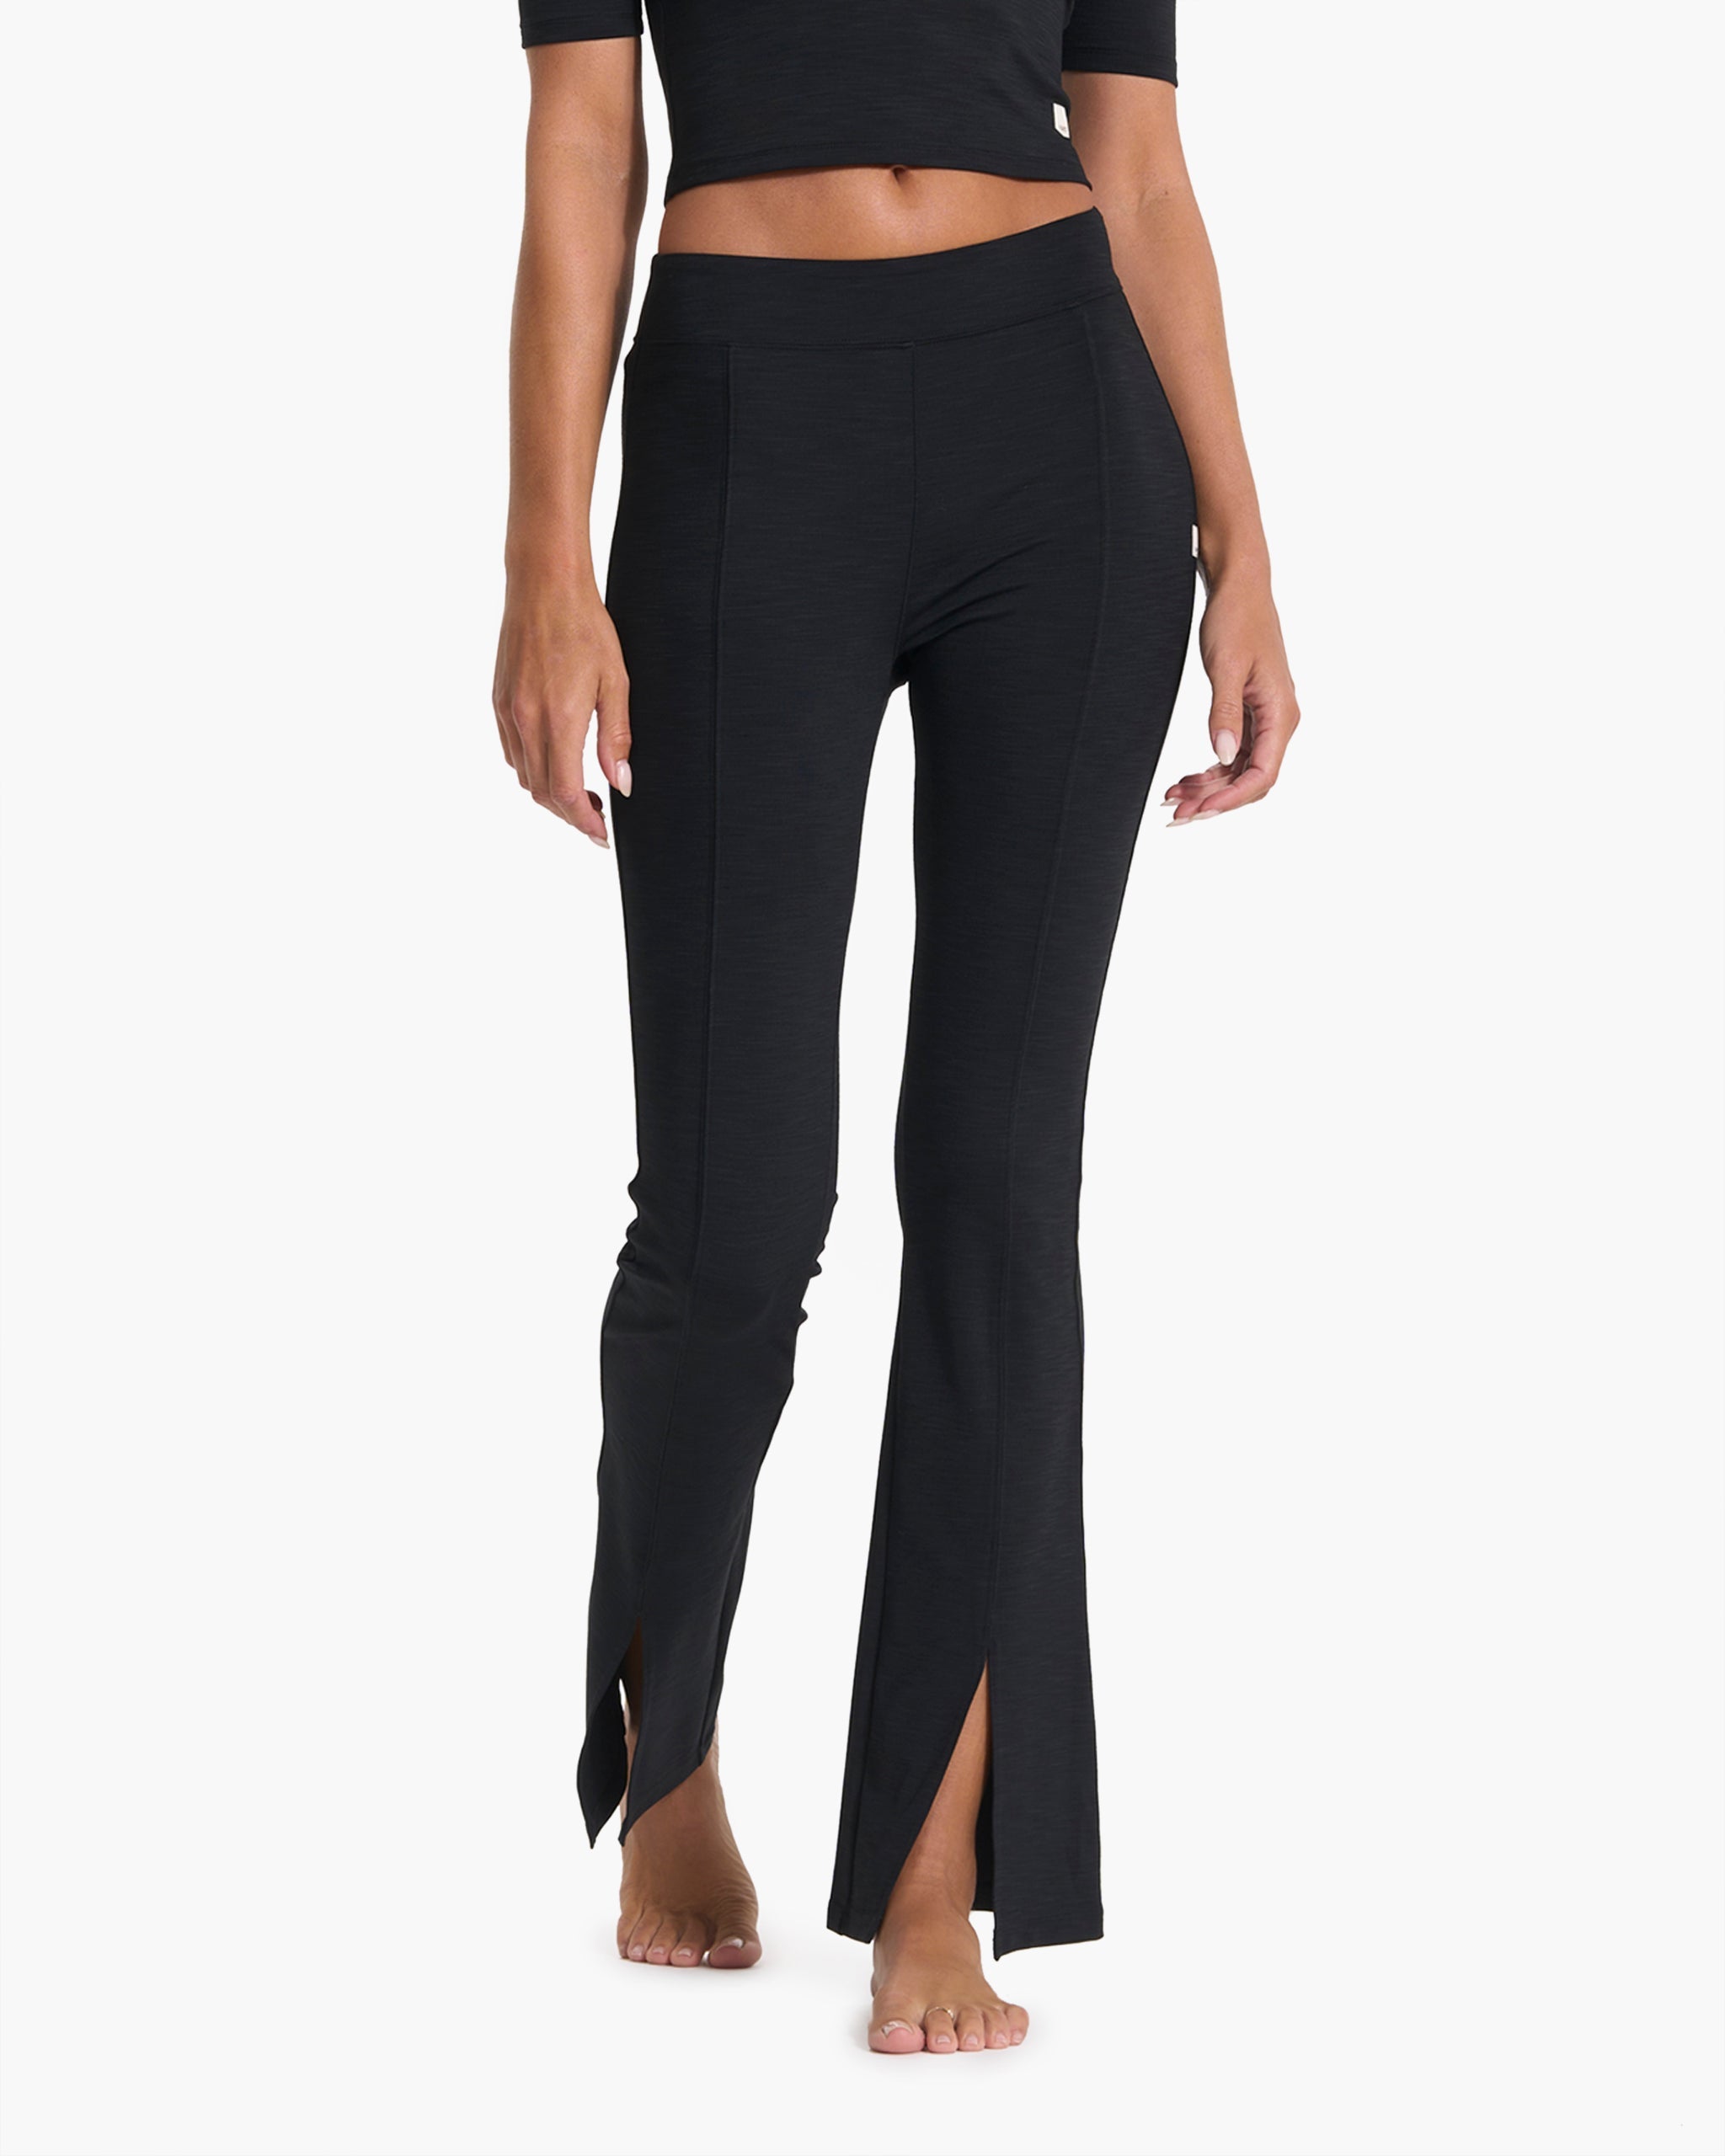 These flared leggings are SO comfortable & tall & curvy girl